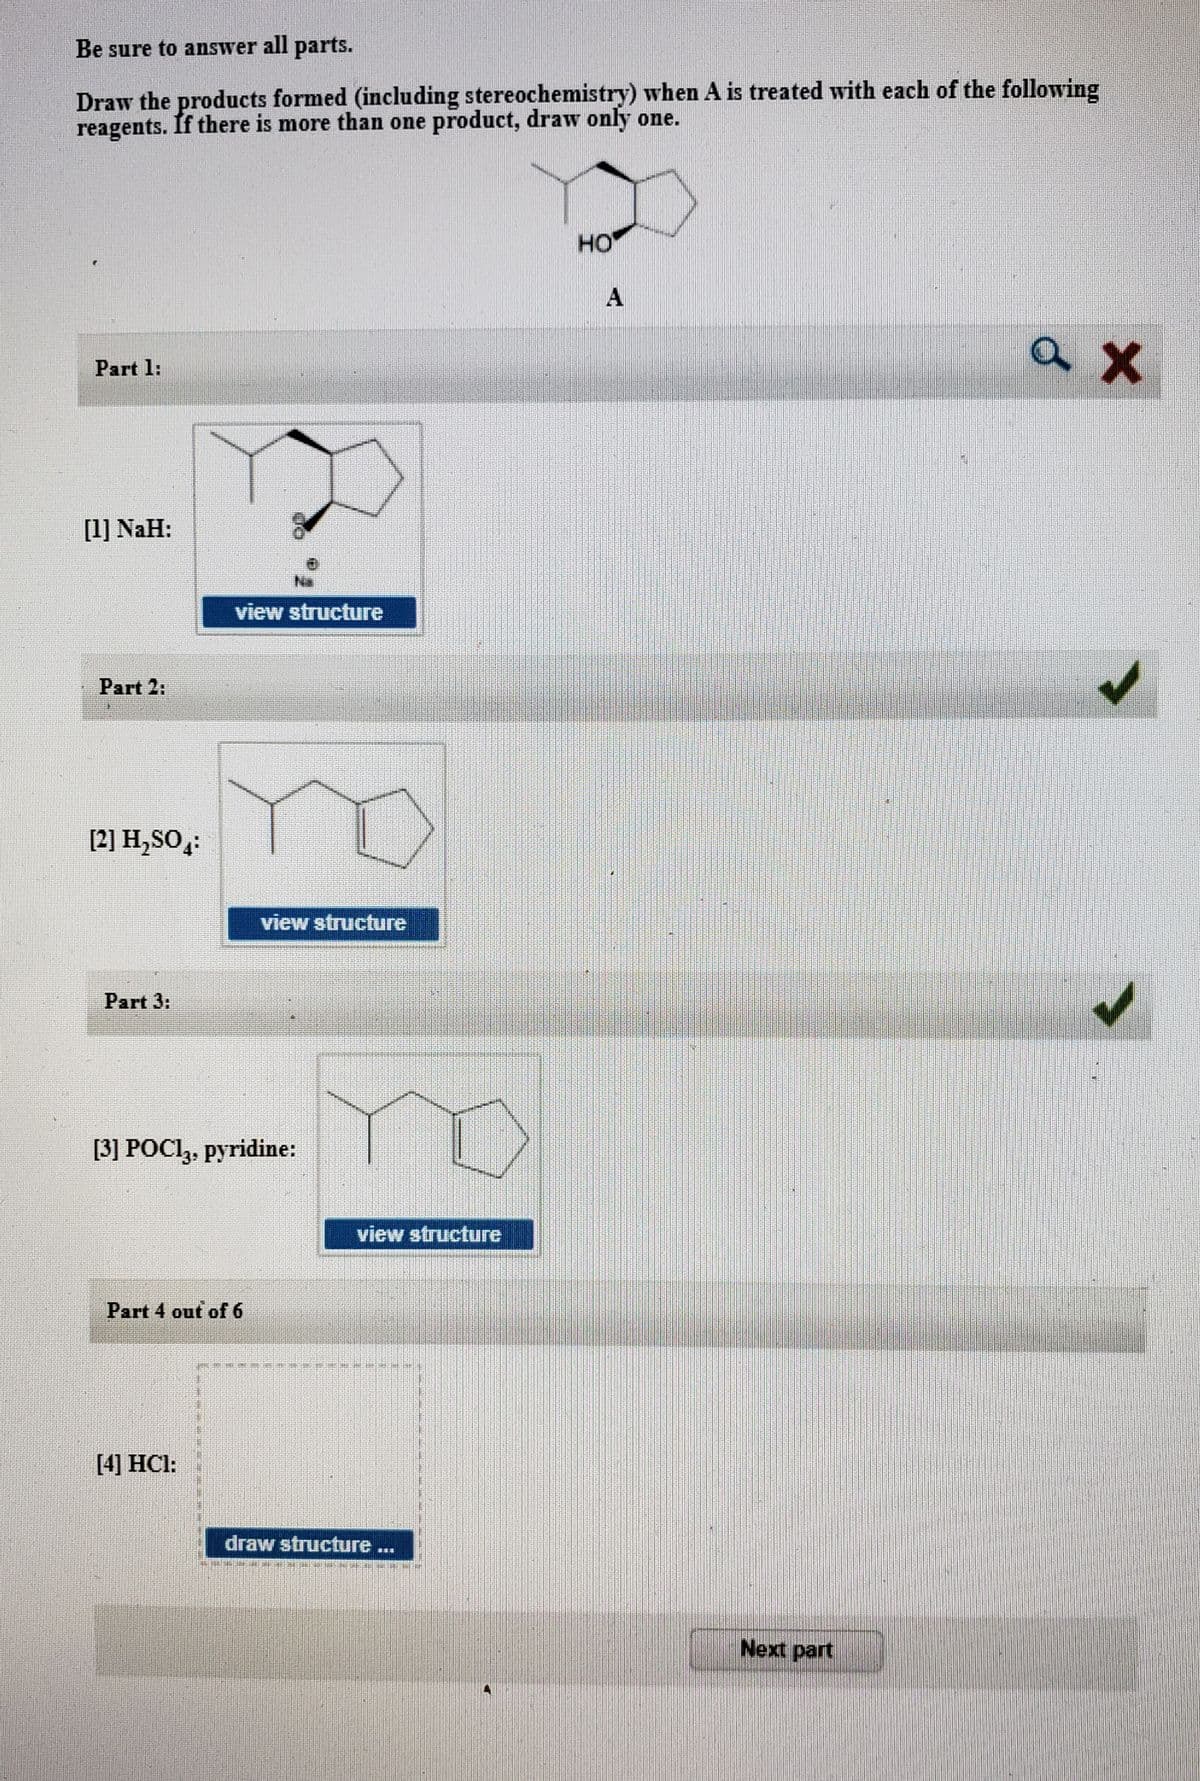 Be sure to answer all parts.
Draw the products formed (including stereochemistry) when A is treated with each of the following
reagents. If there is more than one product, draw only one.
но
Part 1:
[1] NaH:
Na
view structure
Part 2:
[2] H,SO:
view structure
Part 3:
no
[3] POCI,, pyridine:
view structure
Part 4 out of 6
[4] HCl:
draw structure ...
Next part
